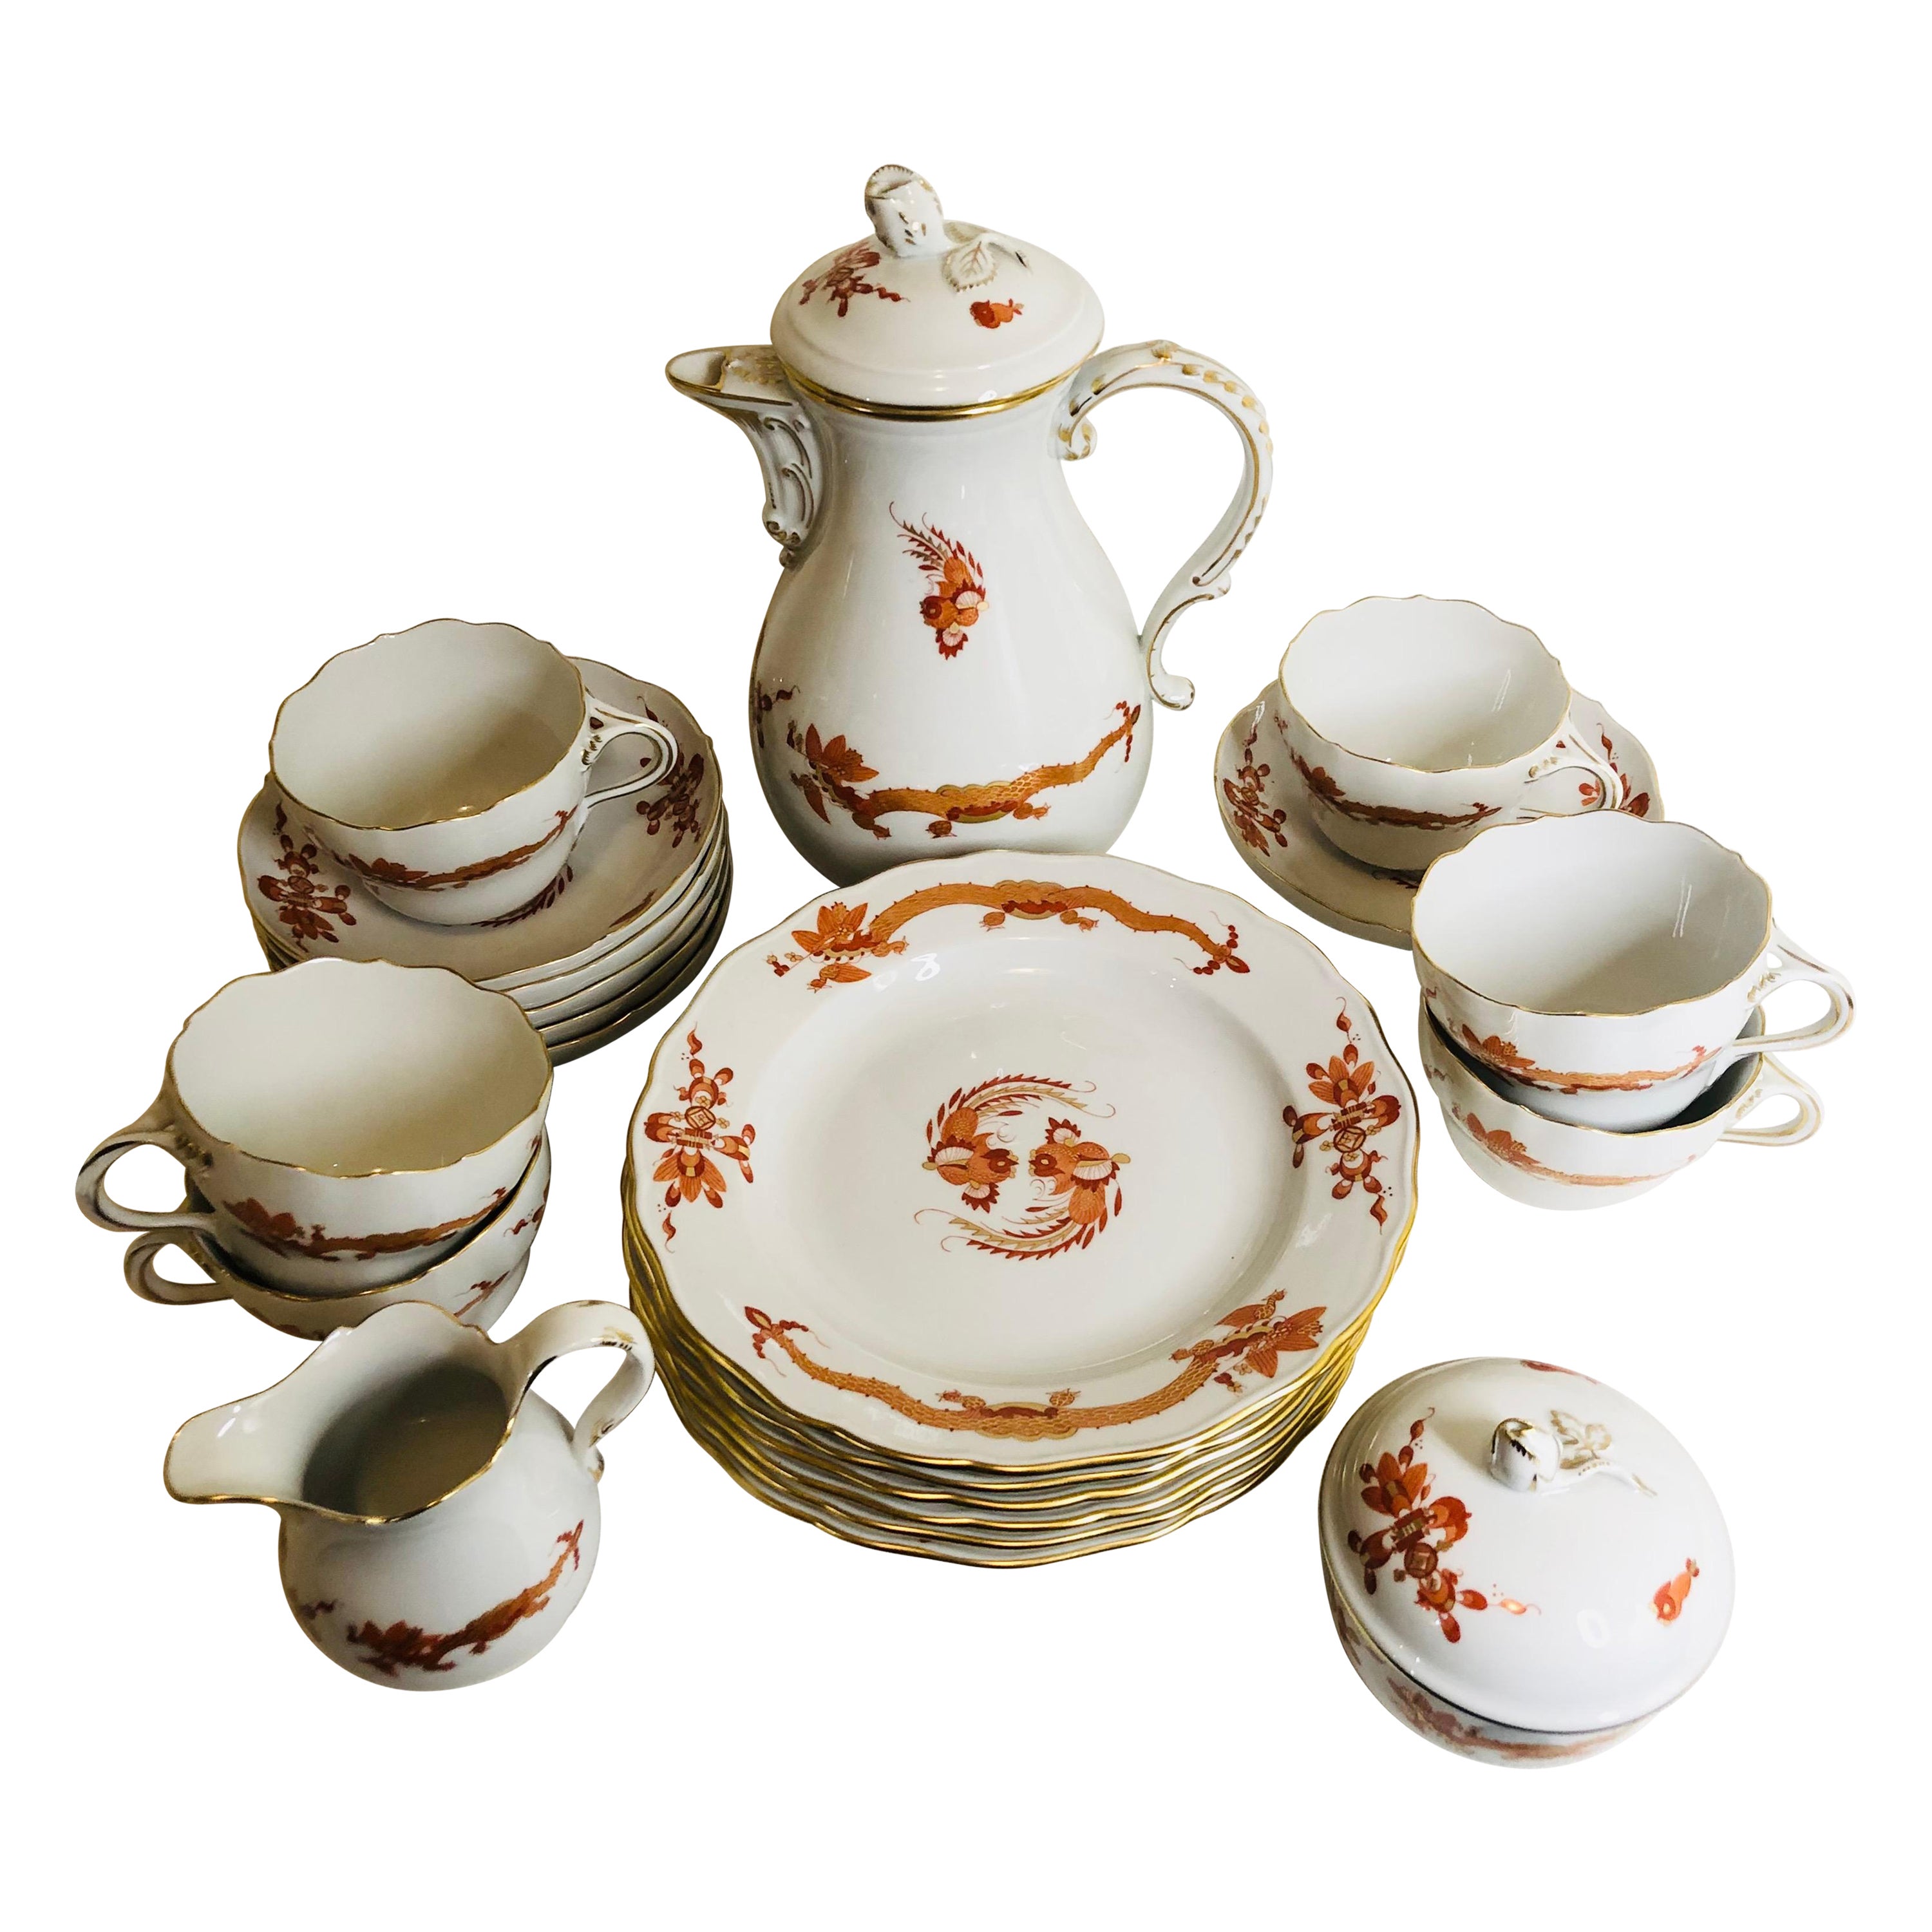 Meissen Rich Court Dragon Tea Set with Six Dessert Plates and 6 Cups & Saucers